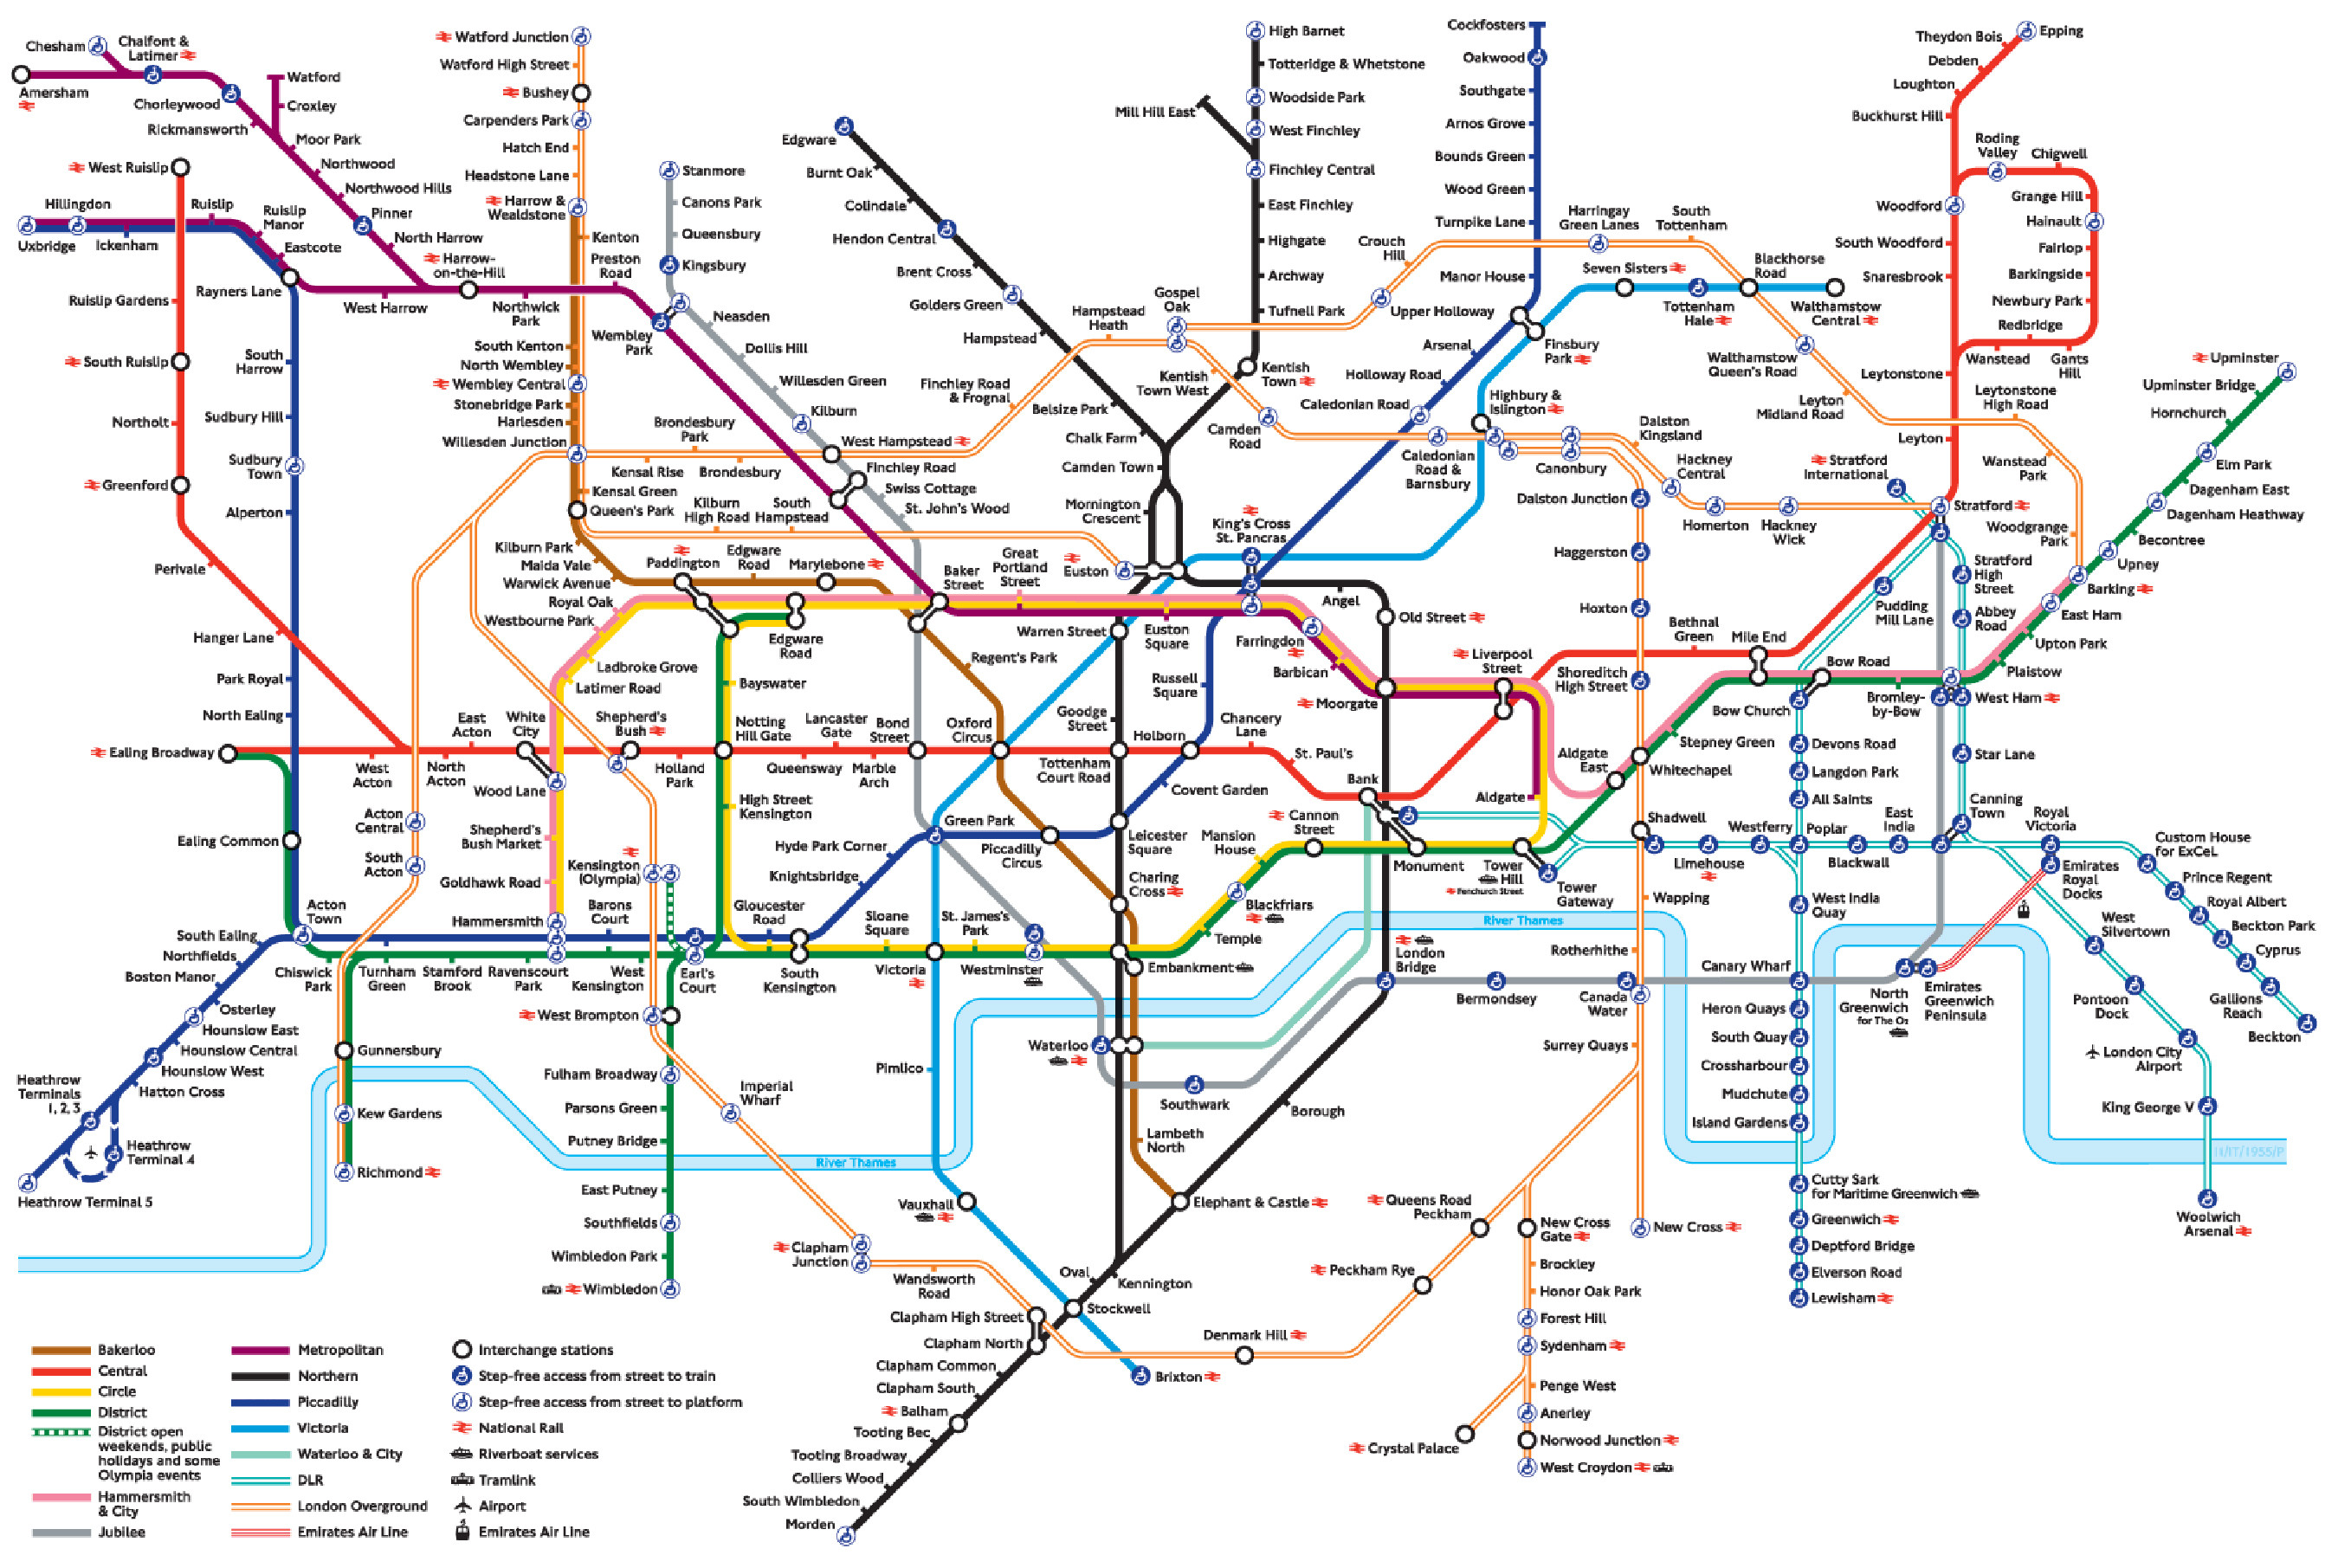 London Tube Map and Zones 2015 Chameleon Web Services